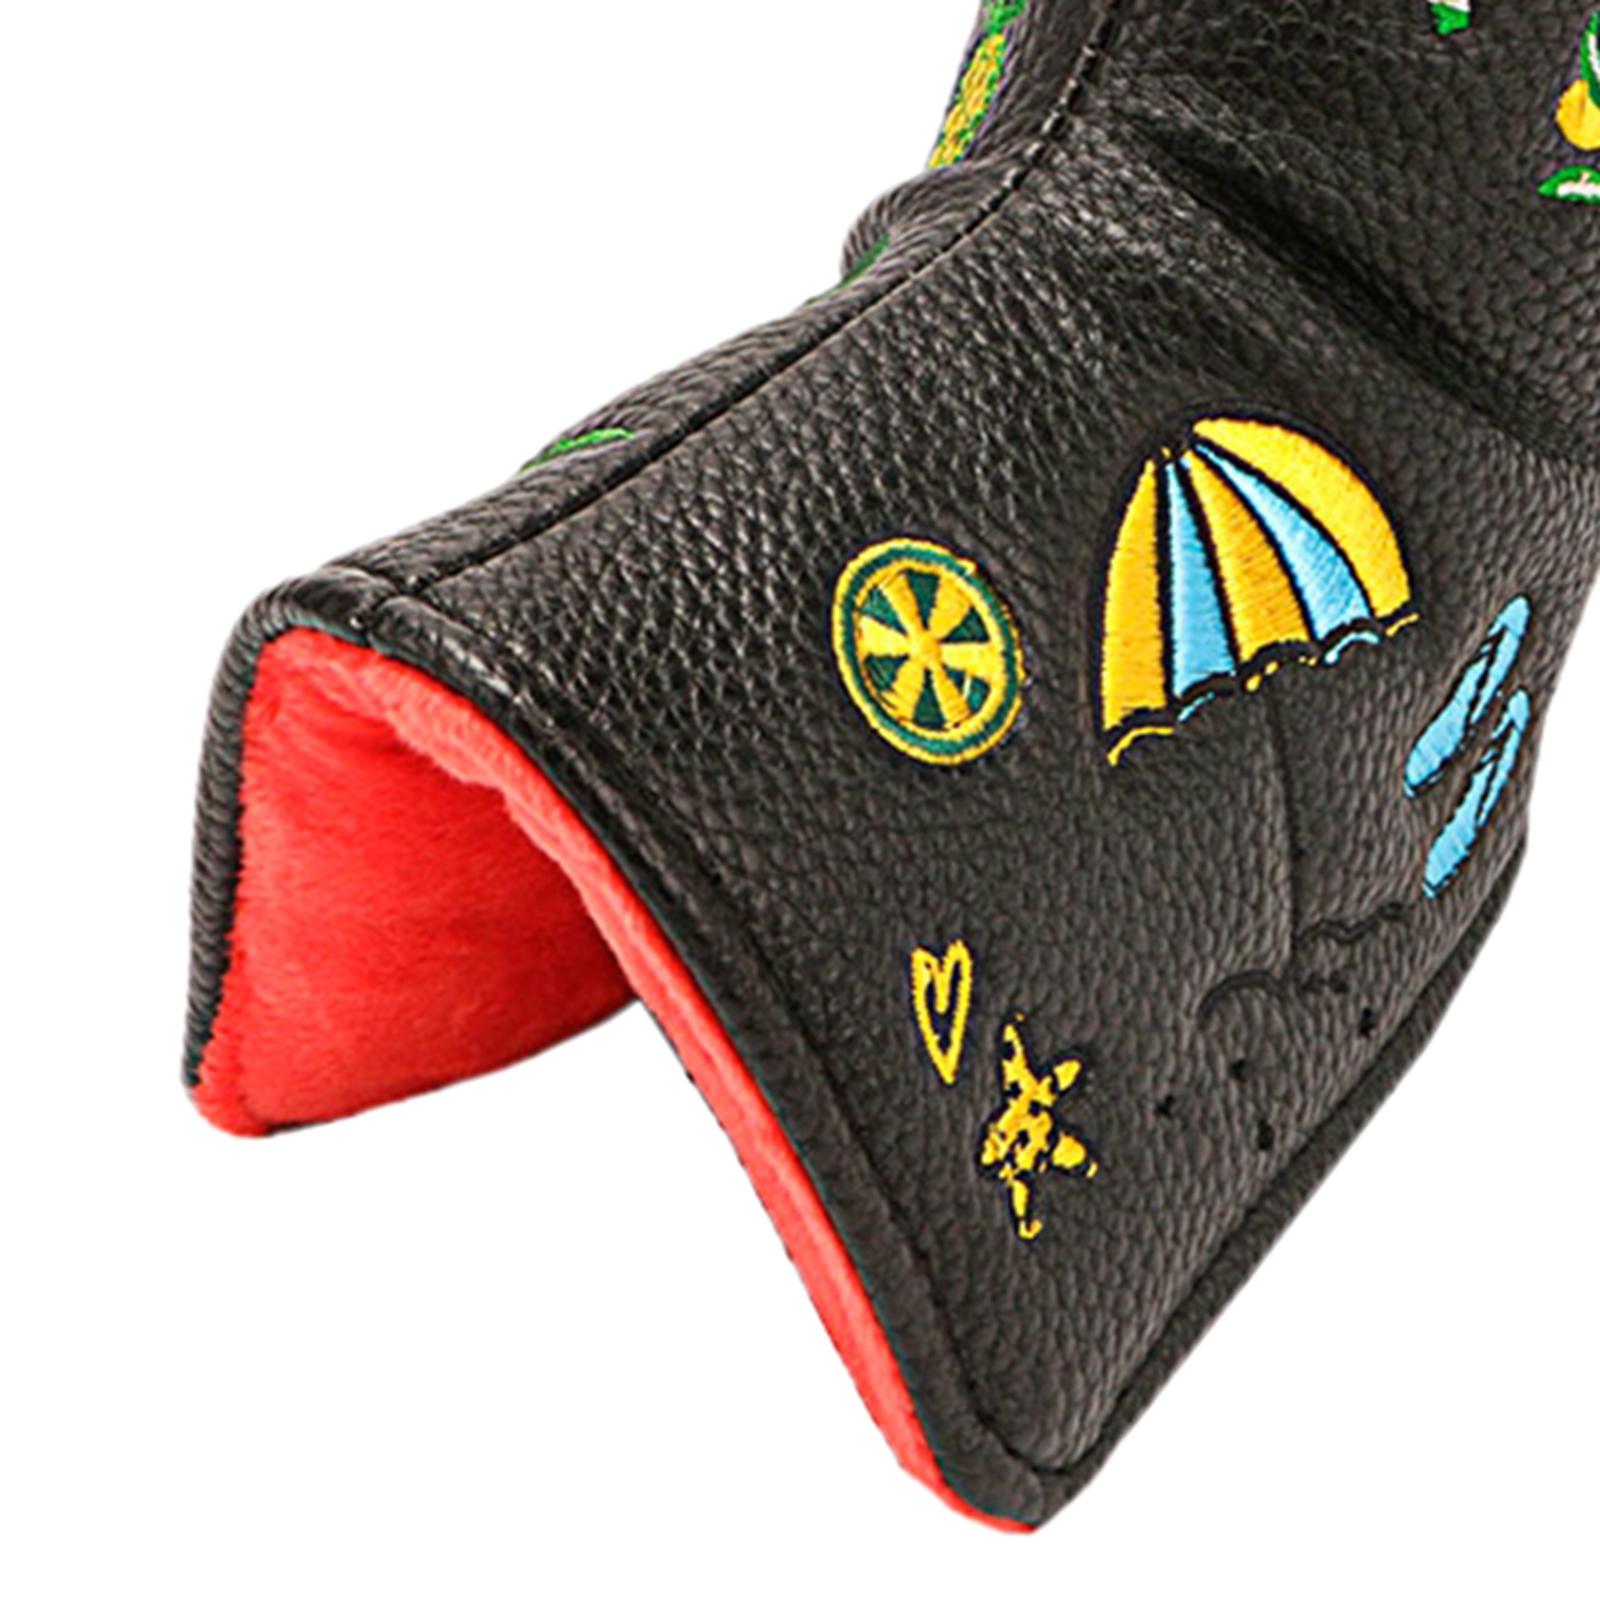 Golf Putter Head Cover Summer Elements Design Protection Fits All Brands black